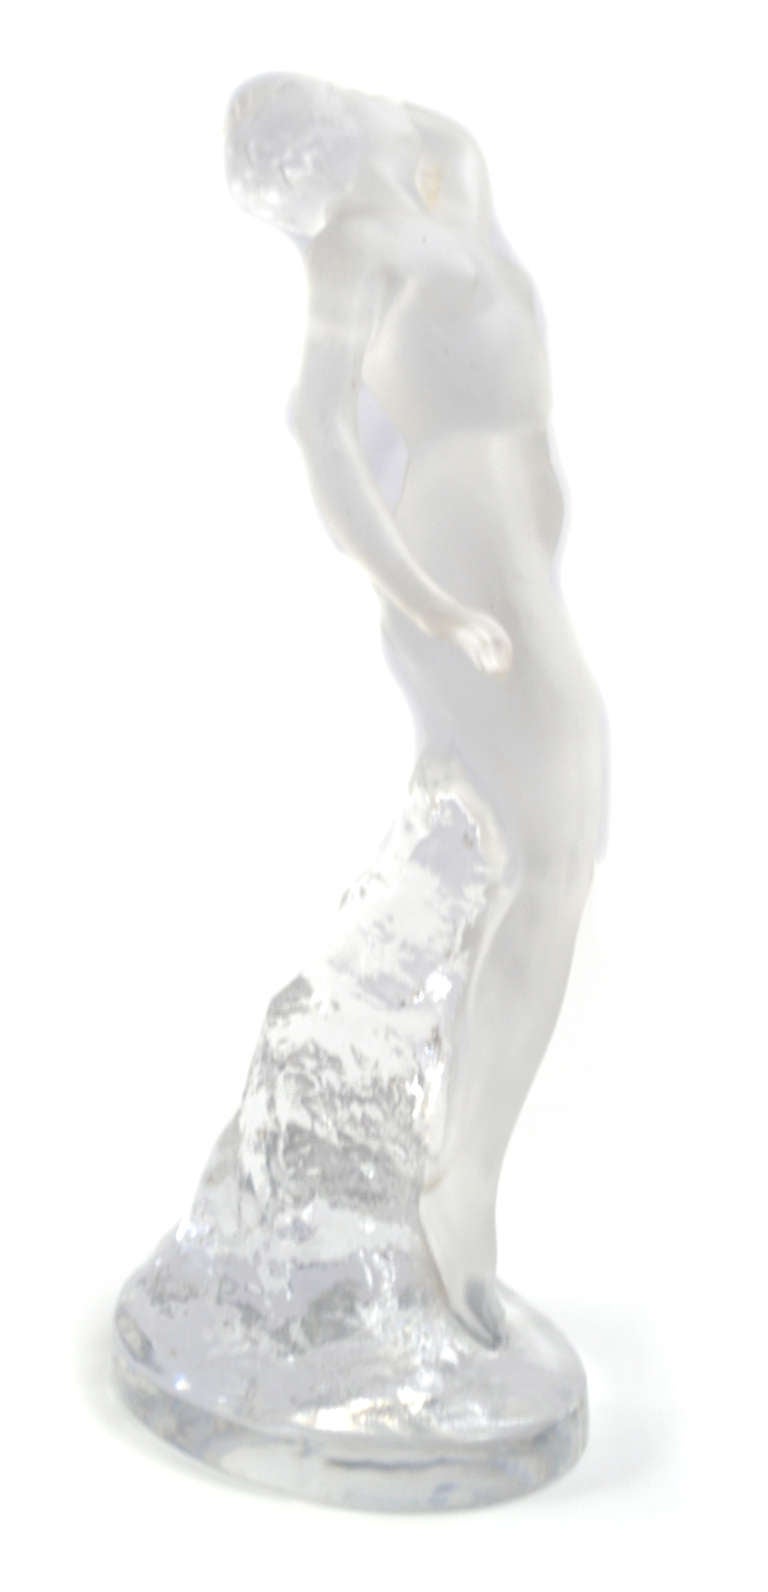 A frosted and clear glass statue of a nude woman, signed 